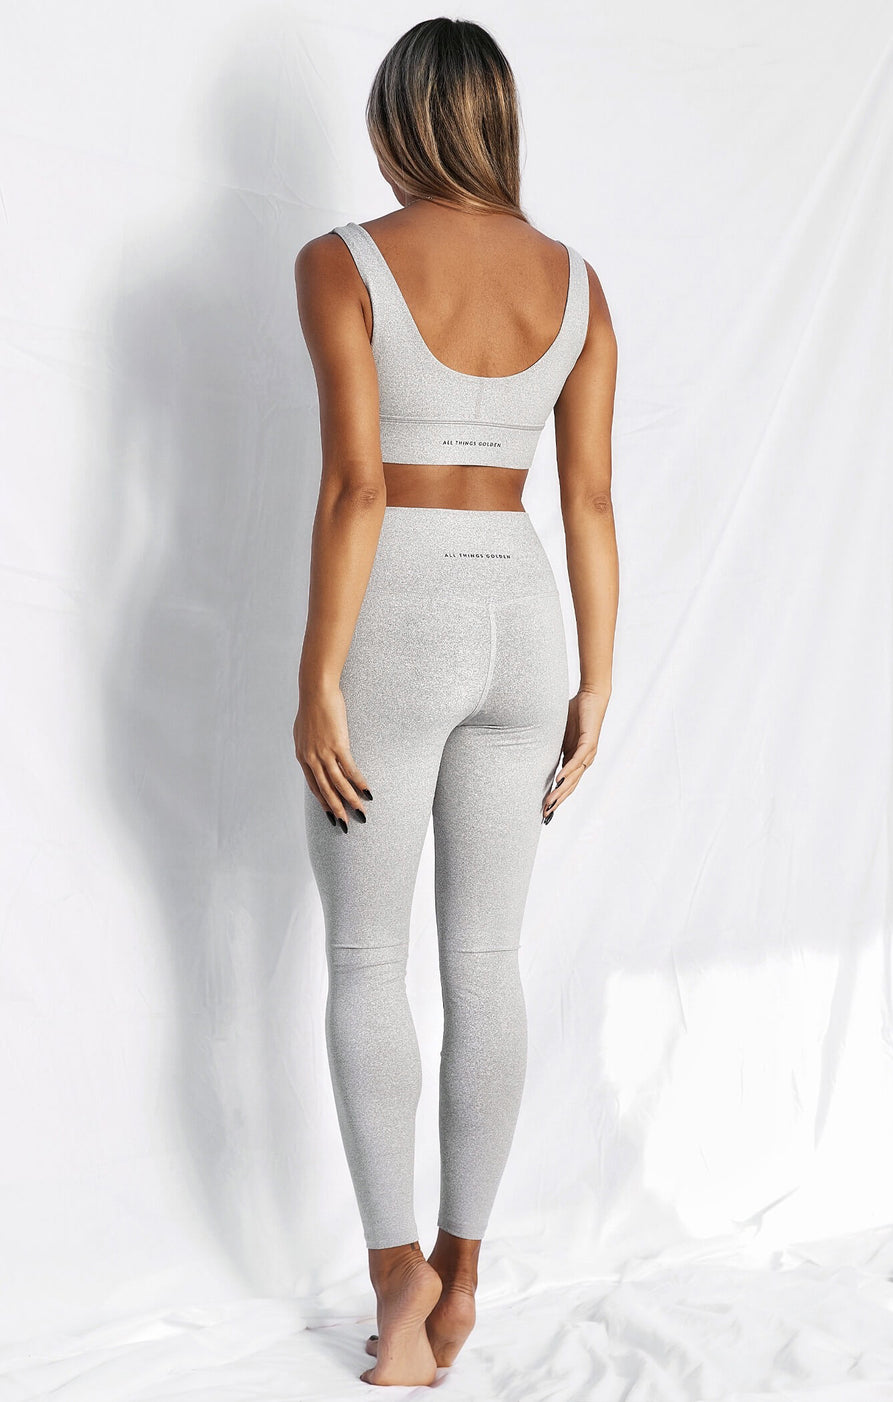 THE A.T.G SCULPT™ LEGGINGS - GREY STATIC – All Things Golden